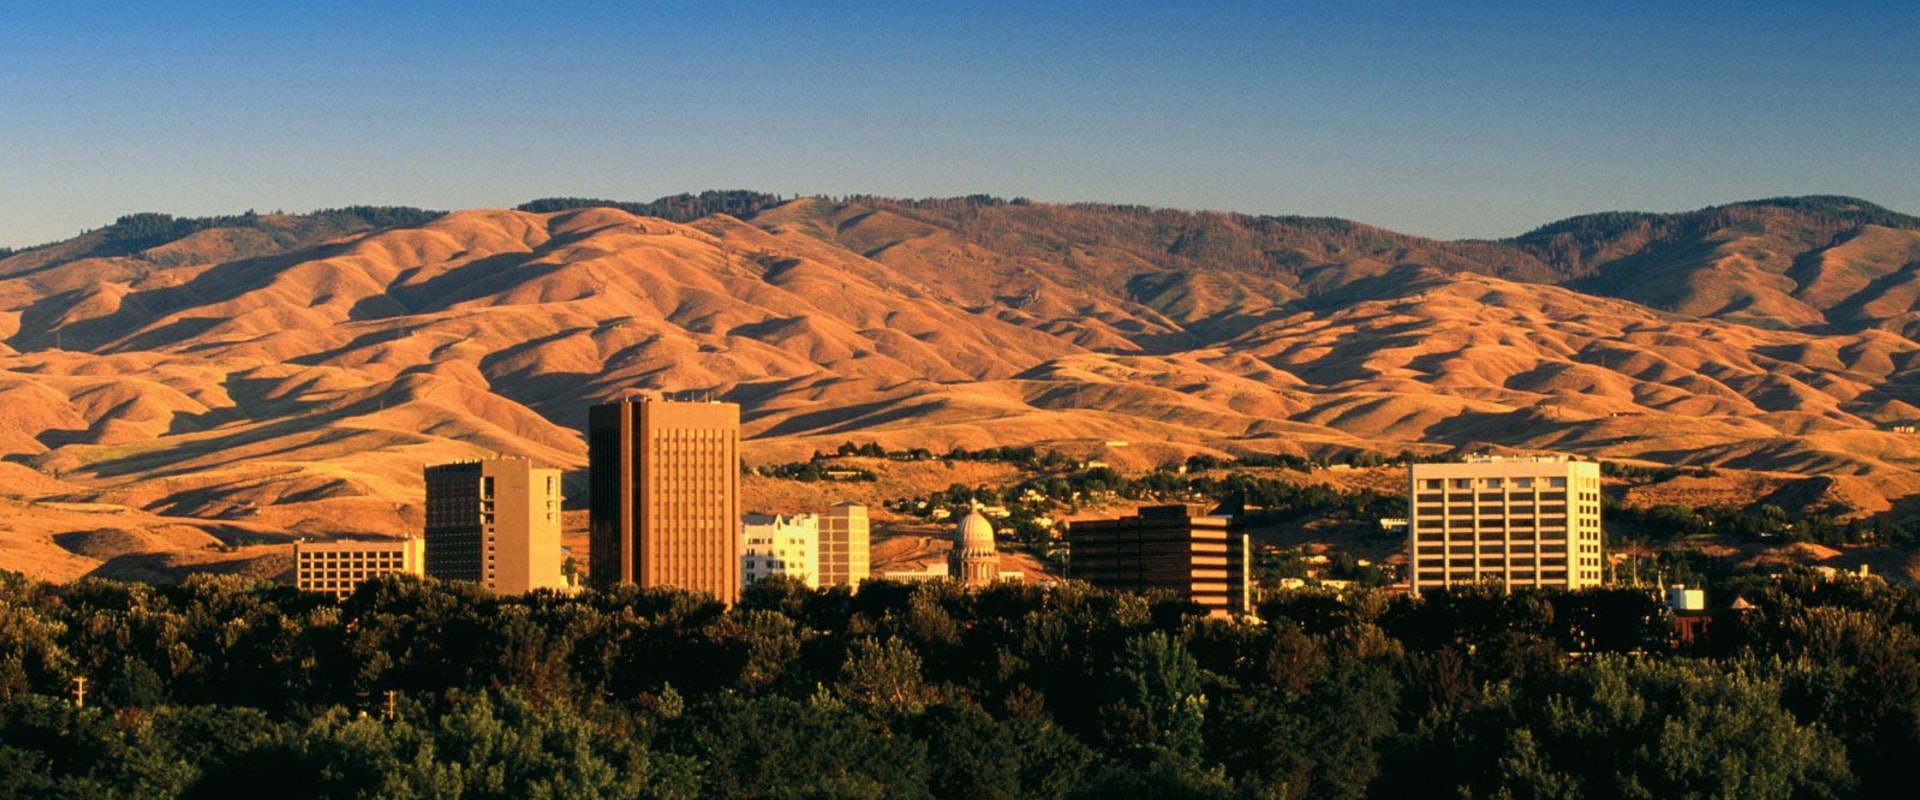 What is special about boise idaho?